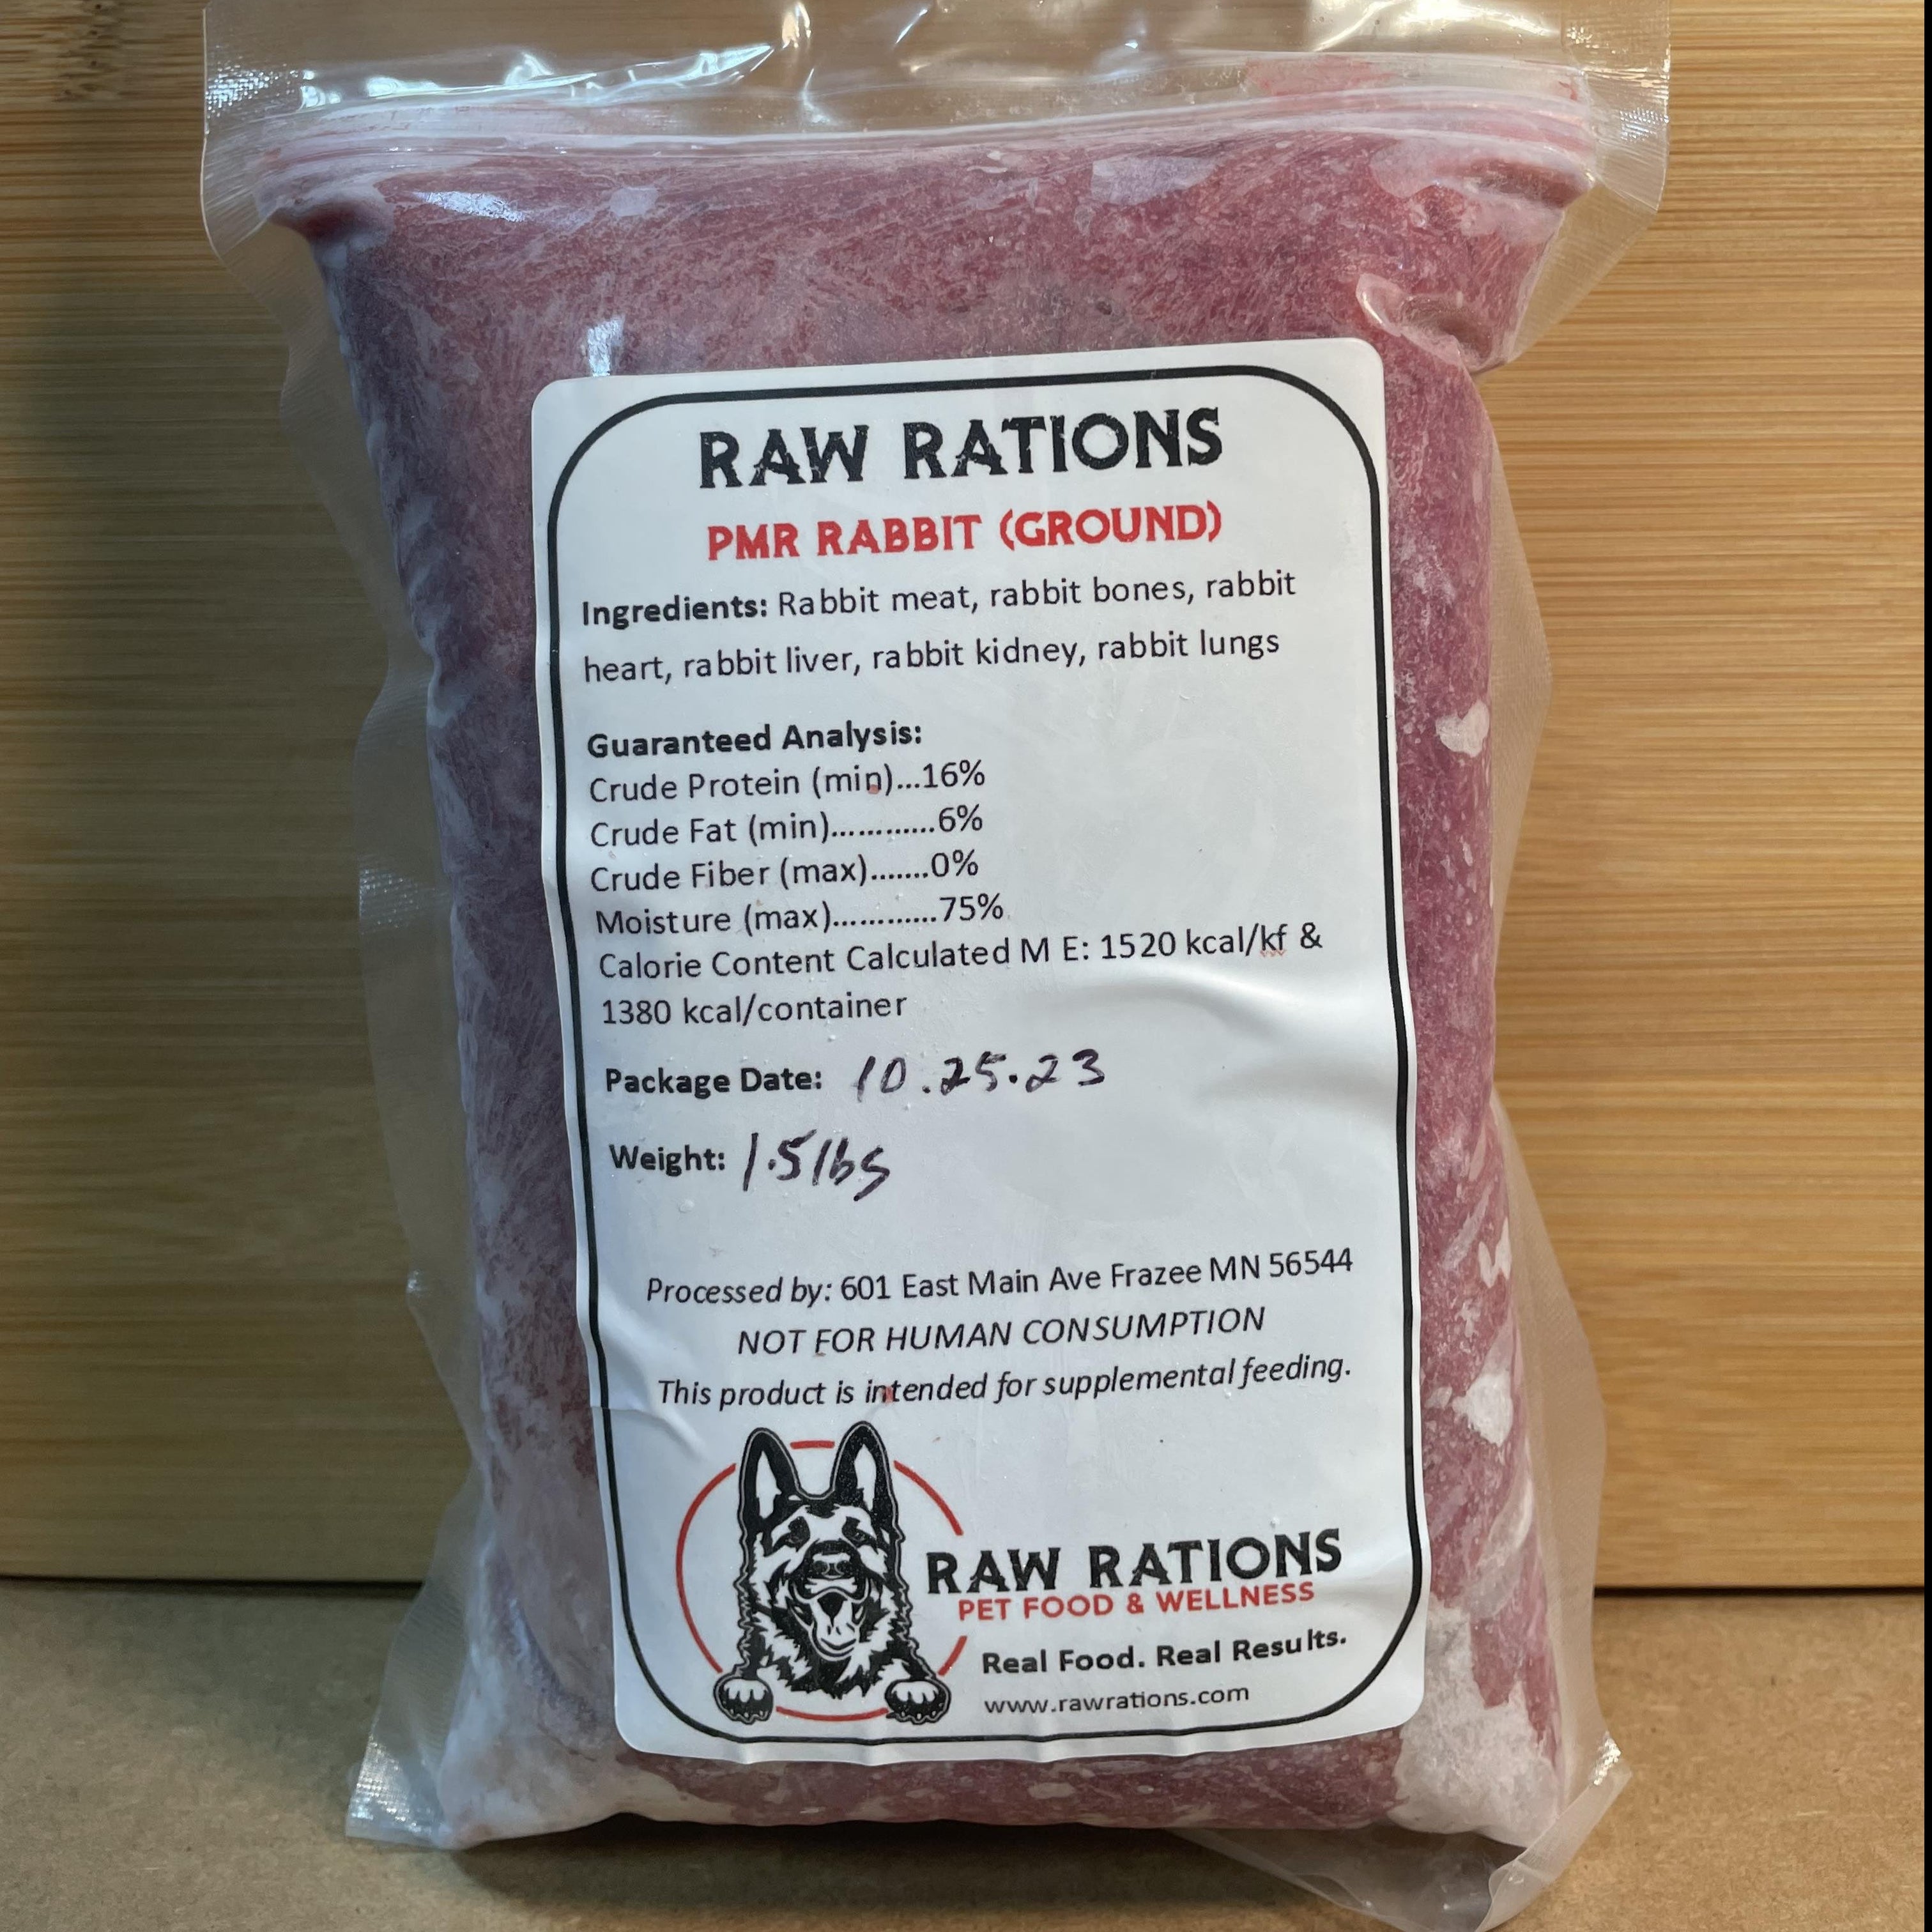 Raw Rations Frozen PMR Rabbit Package